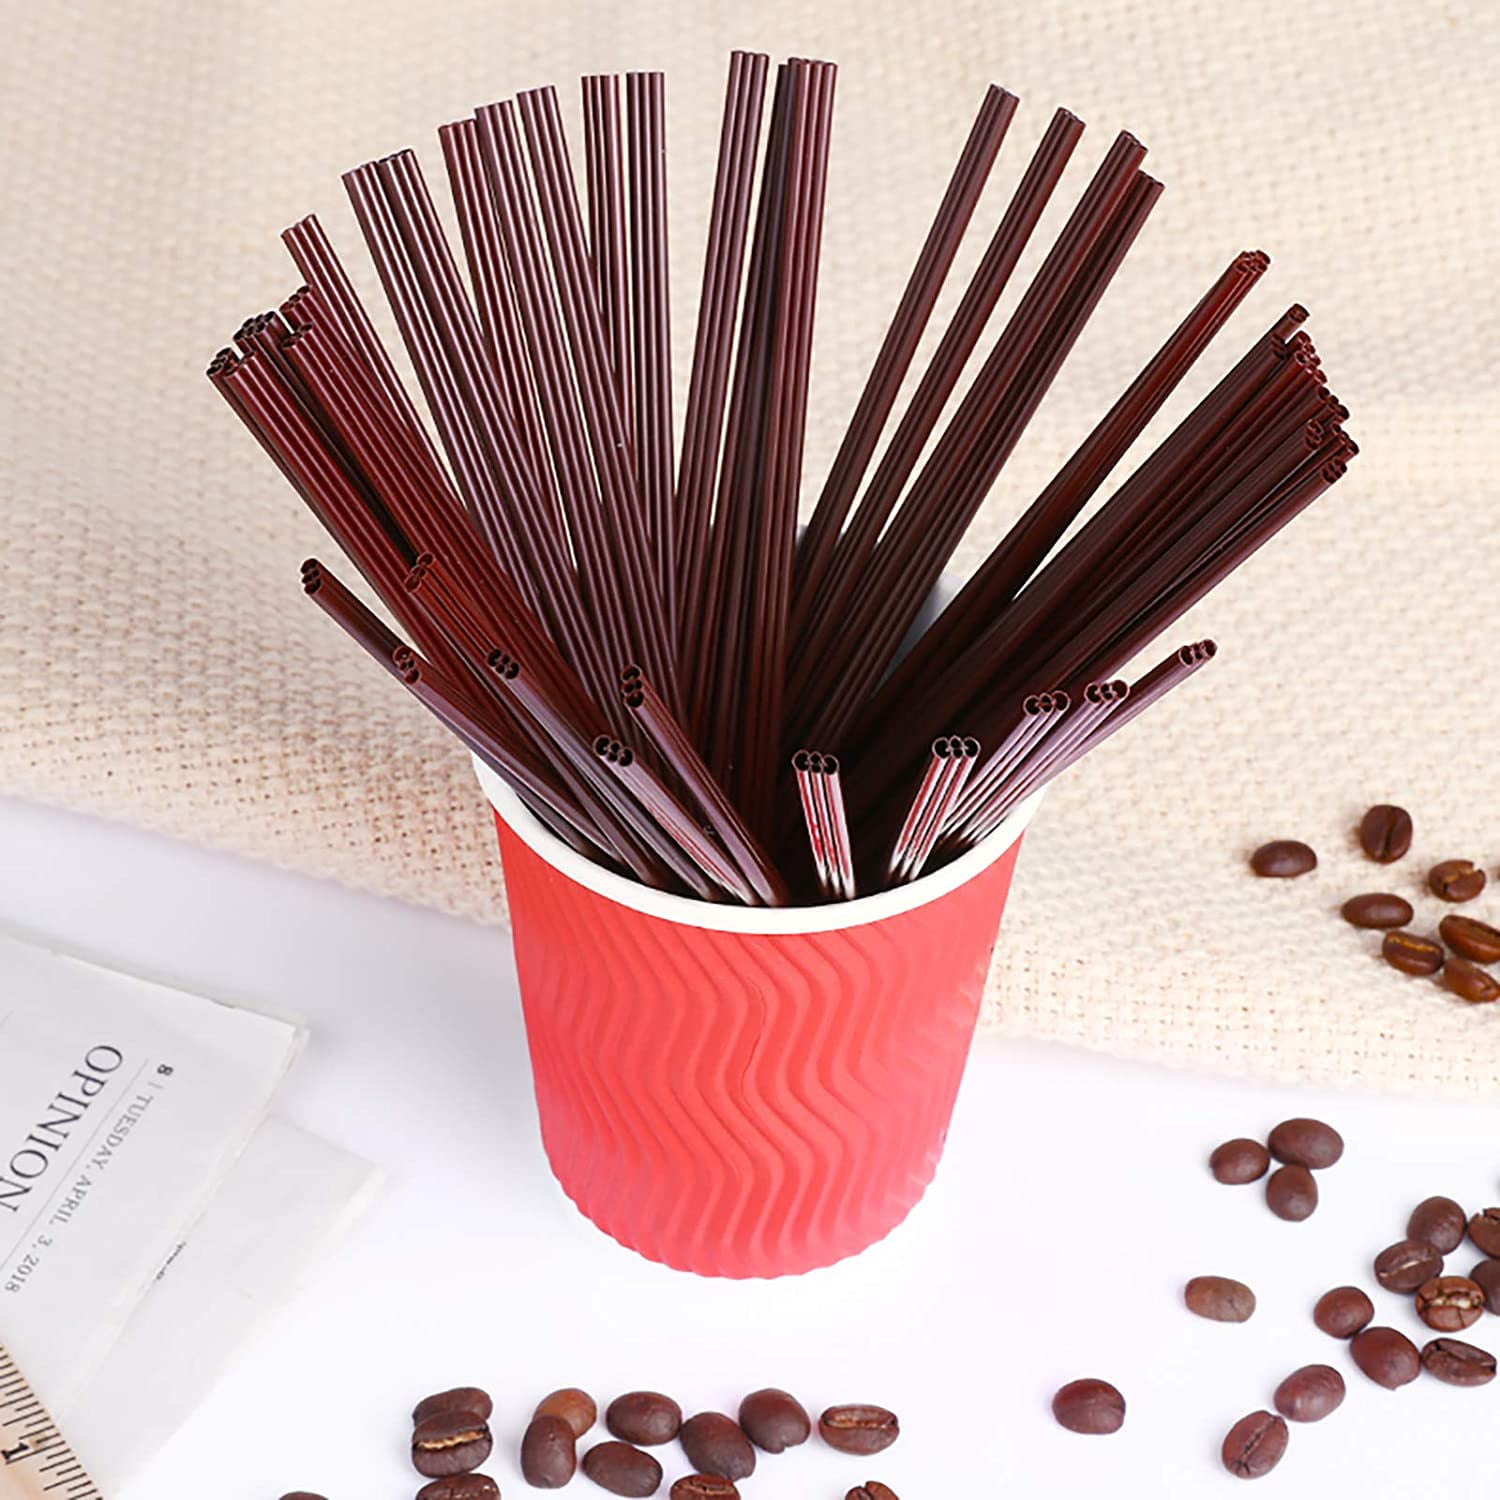 Restpresso 7 inch Coffee Stir Straws, 5000 Disposable Coffee Stirring Rods - Premium, Odorless, Red Plastic Stir Straws for Coffee, for Hot and Cold D